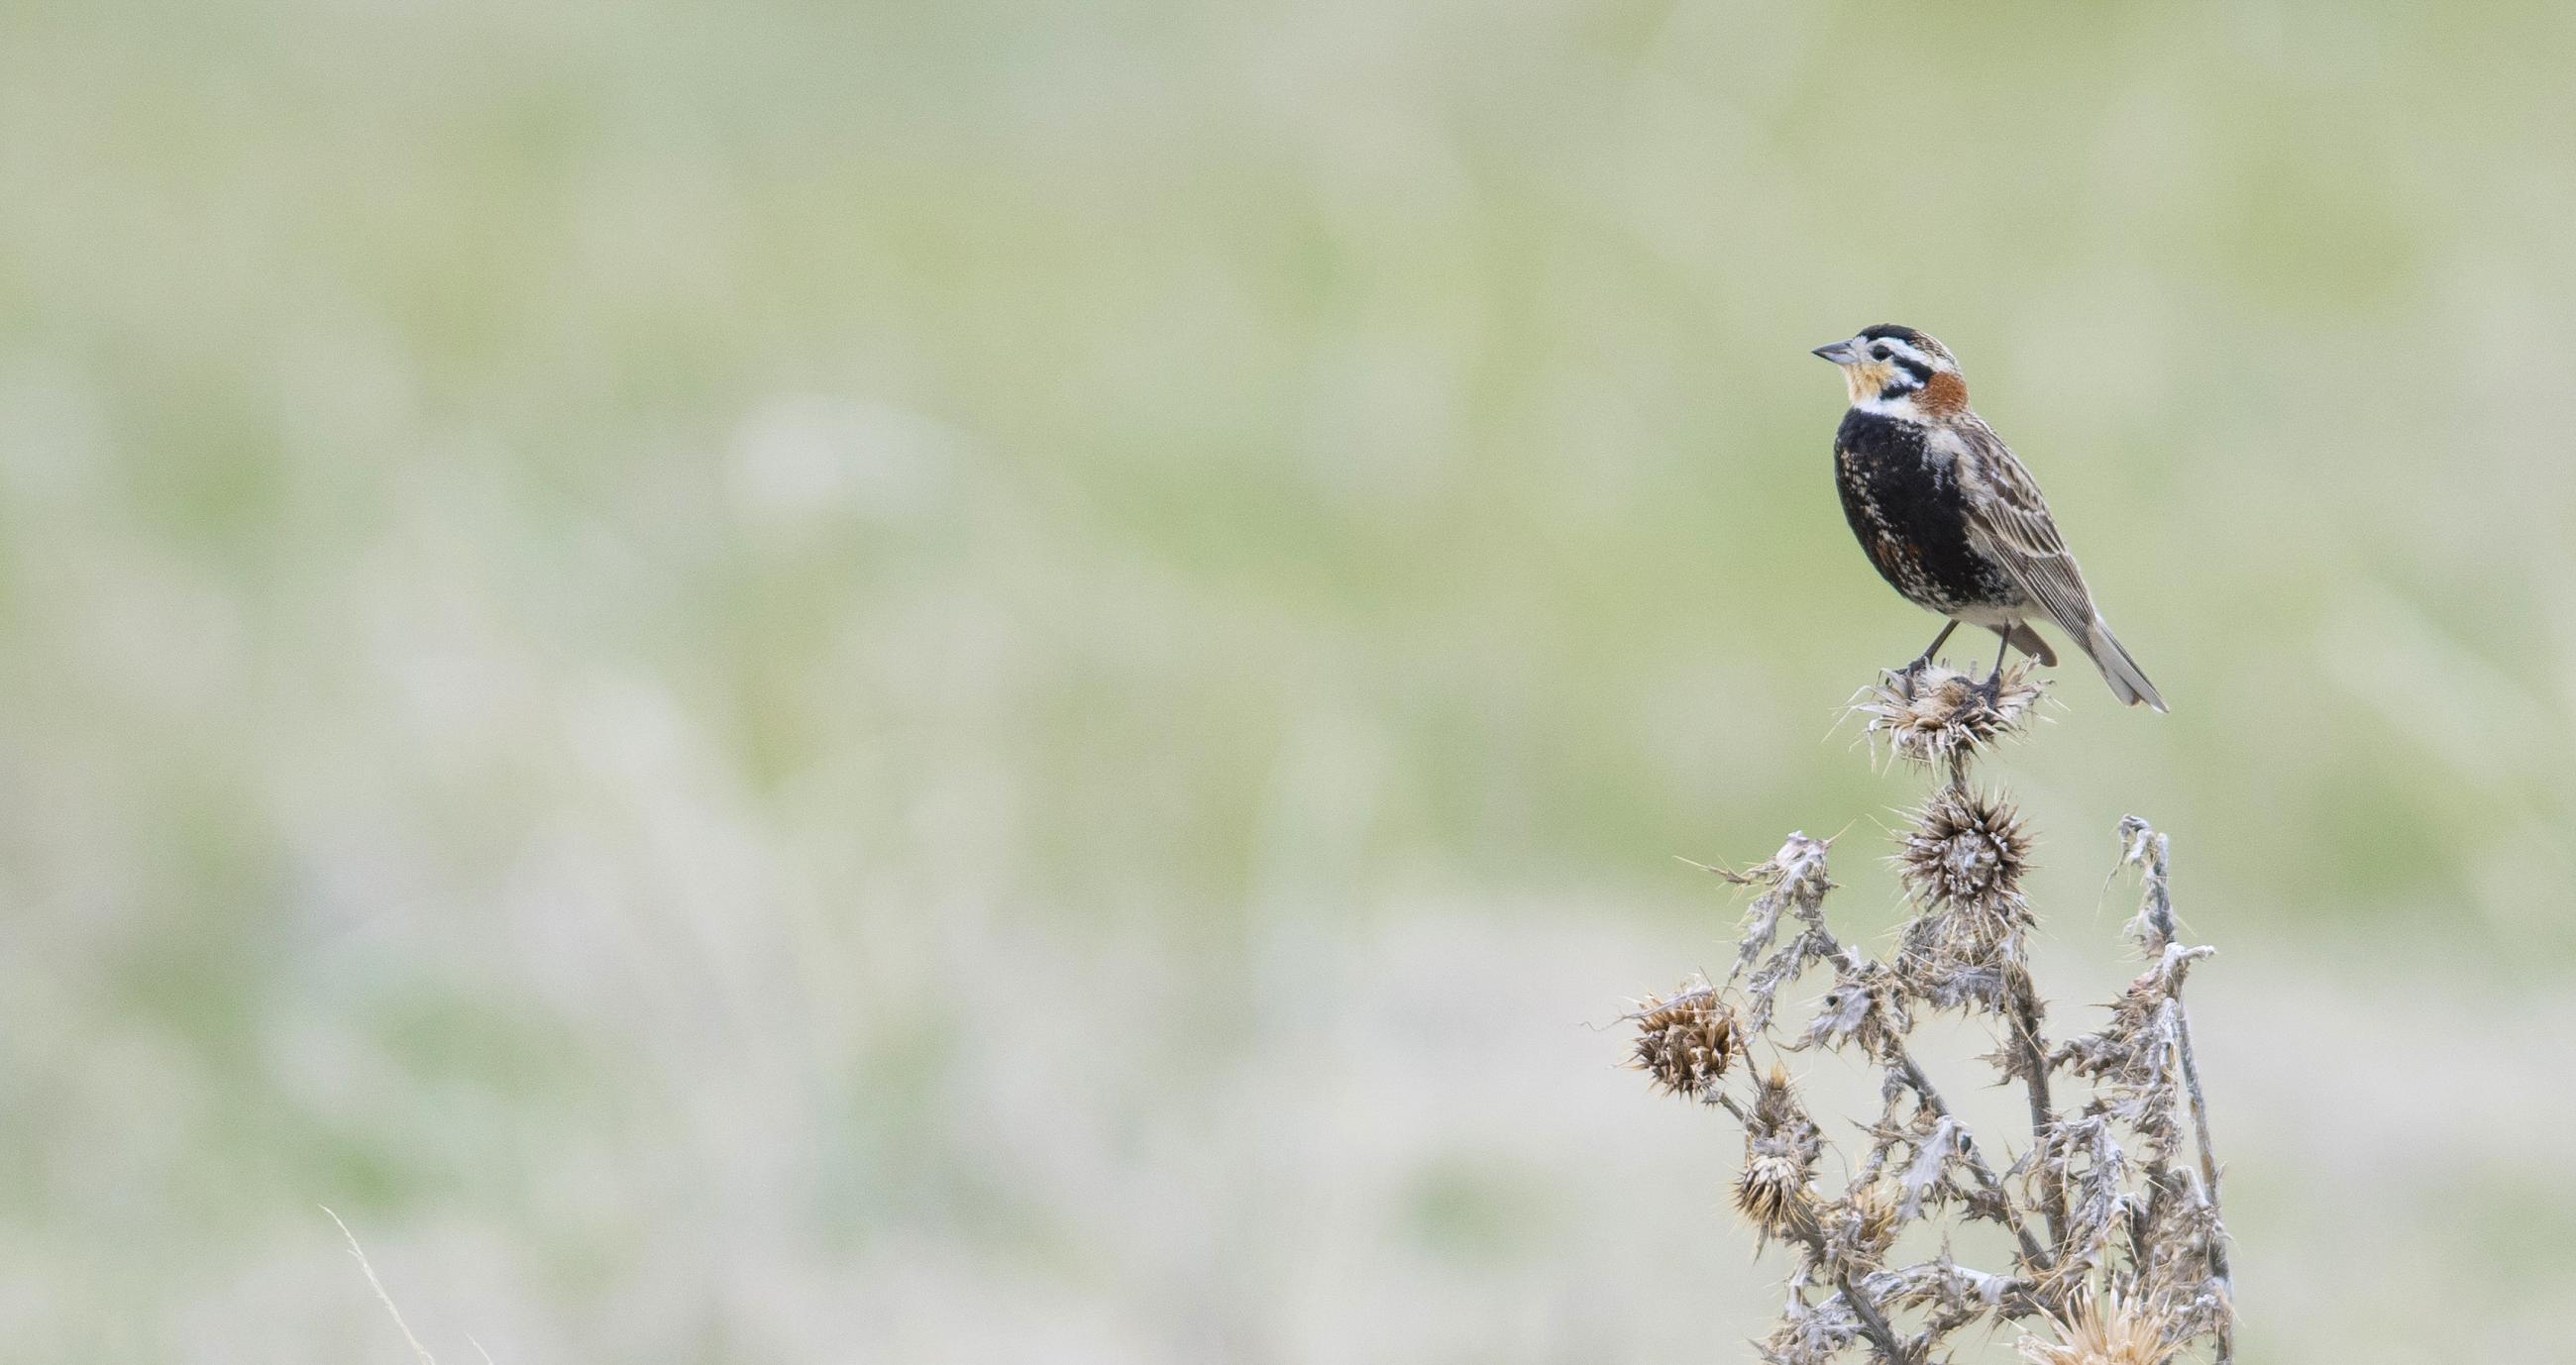 Chestnut-collared Longspur perched on branch